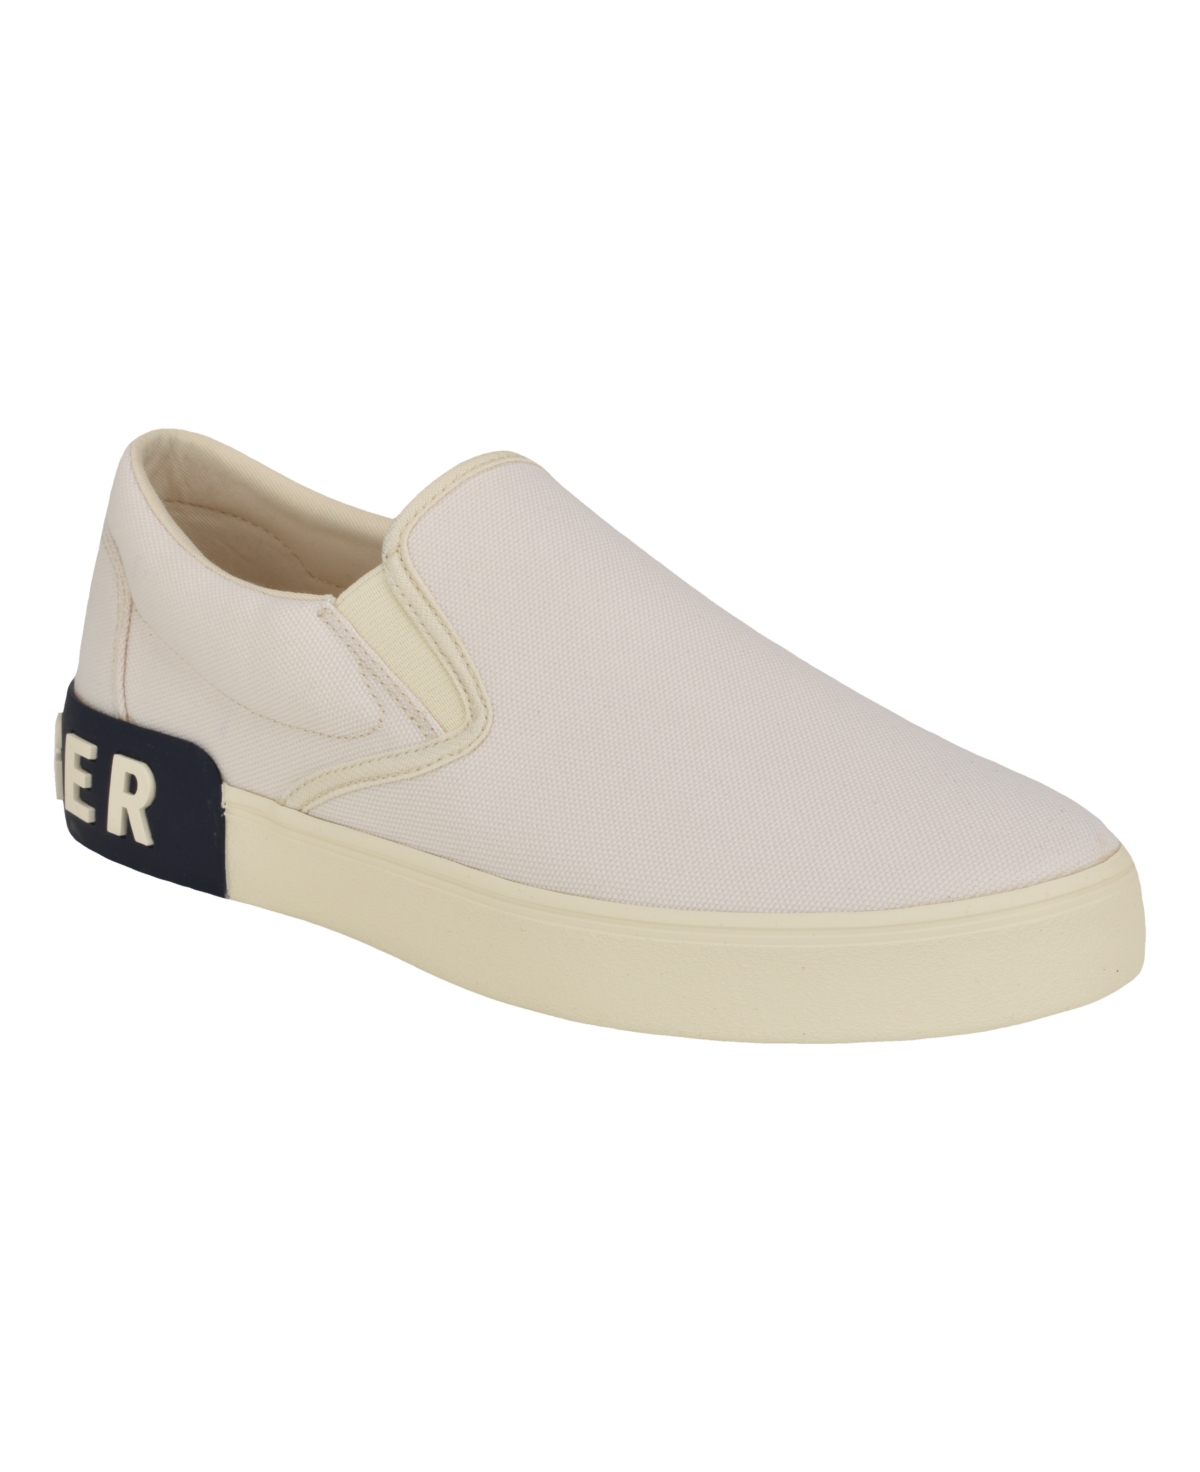 Shop Tommy Hilfiger Men's Rayor Casual Slip-on Sneakers In Light Natural Multi